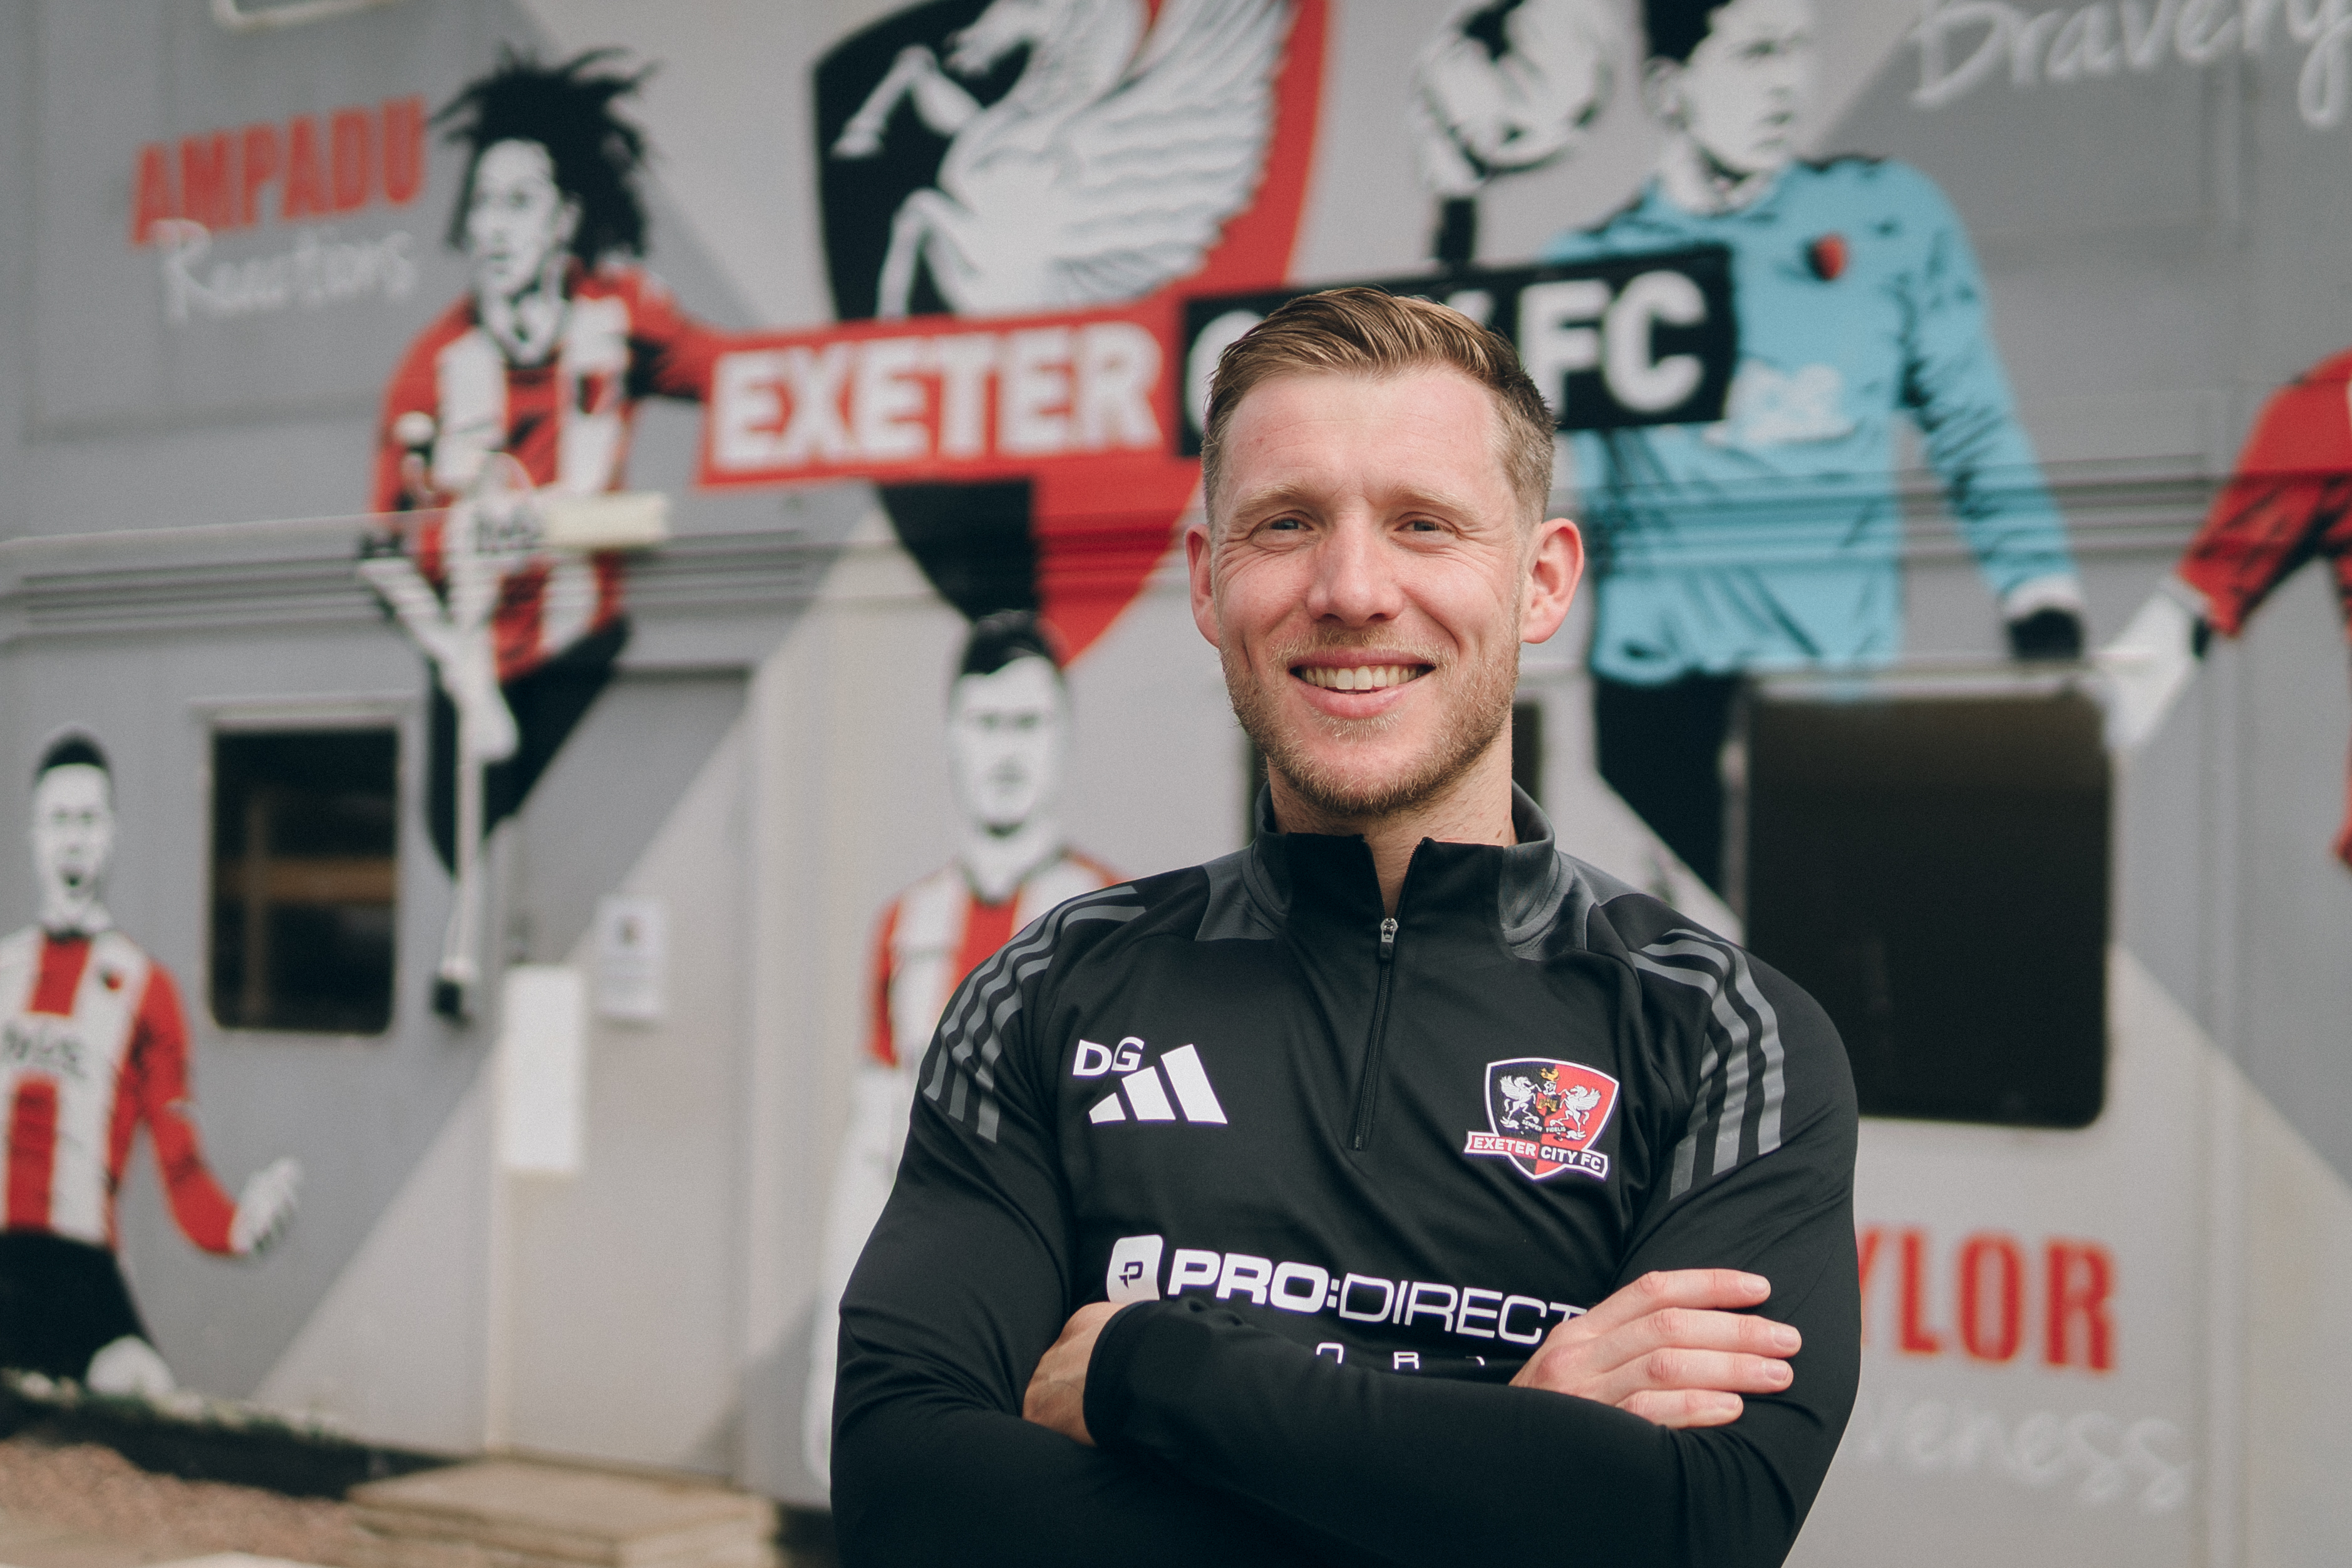 Dan Green stood in front of the ECFC academy building with his arms crossed